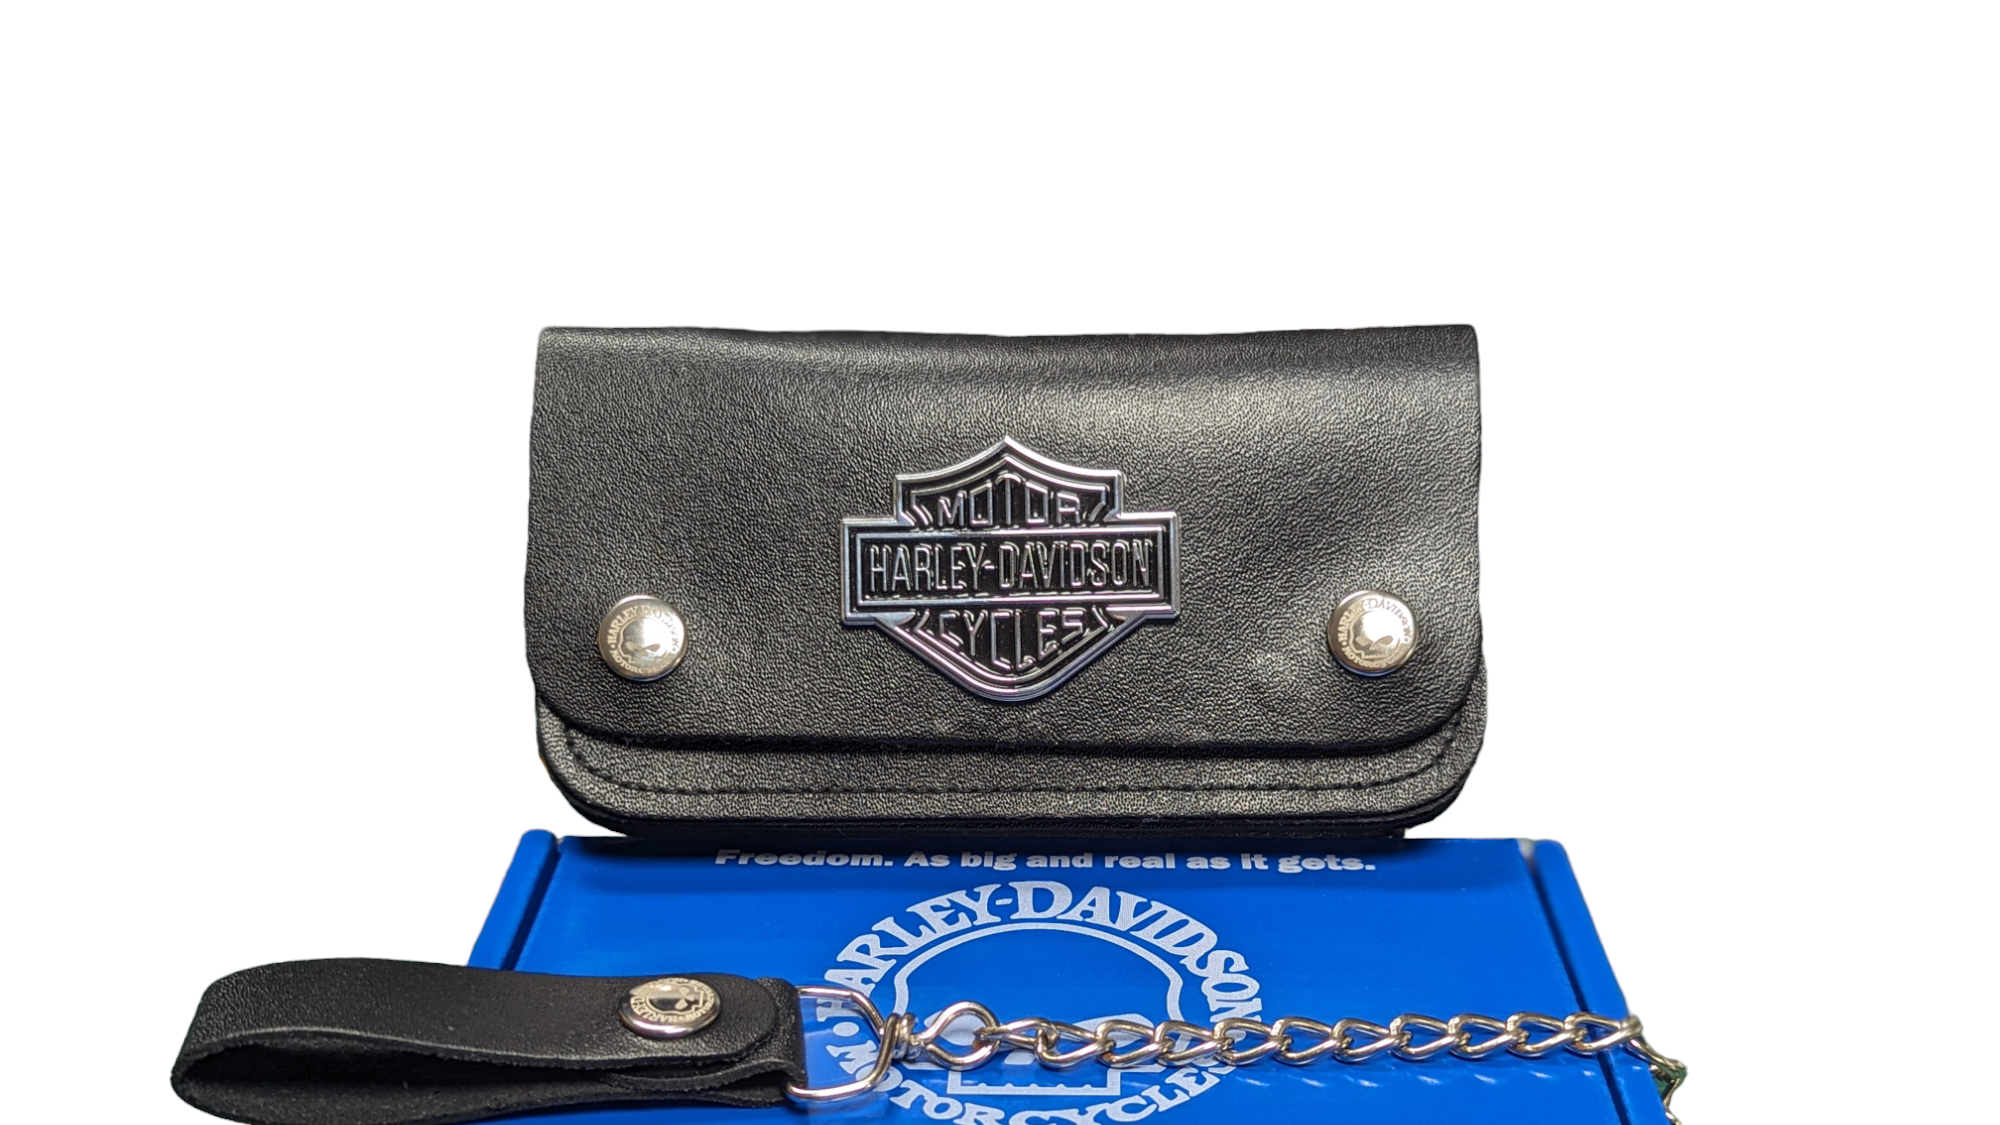 Harley Davidson Hard Leather Bikers Wallet with Safety Chain + Free Swolit Gift